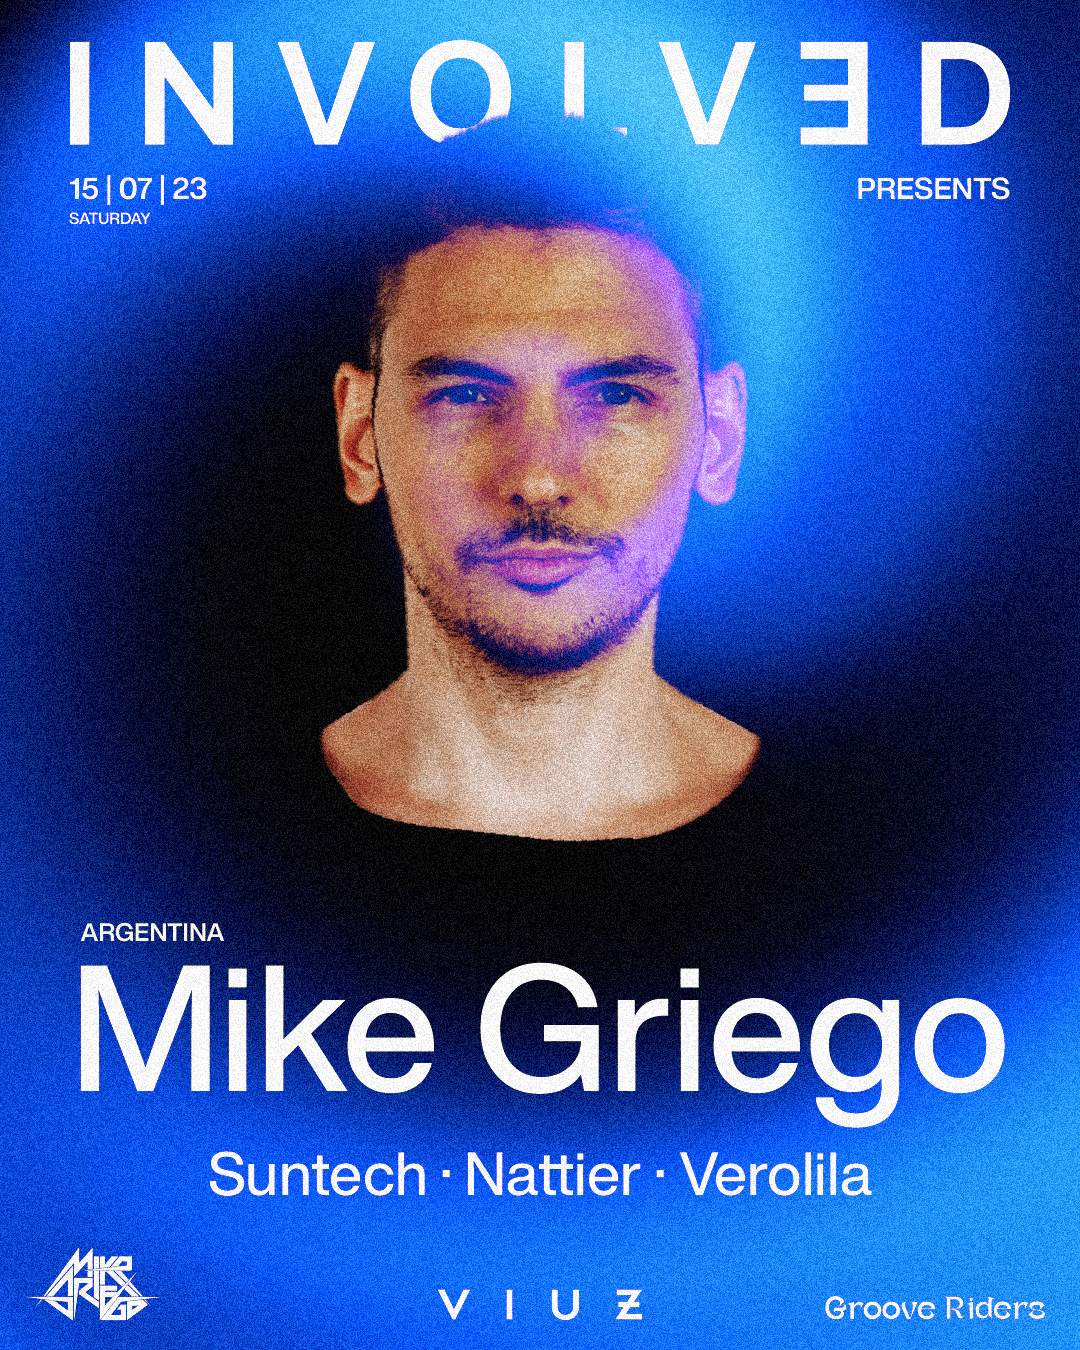 INVOLVED Pres. Mike Griego - フライヤー表